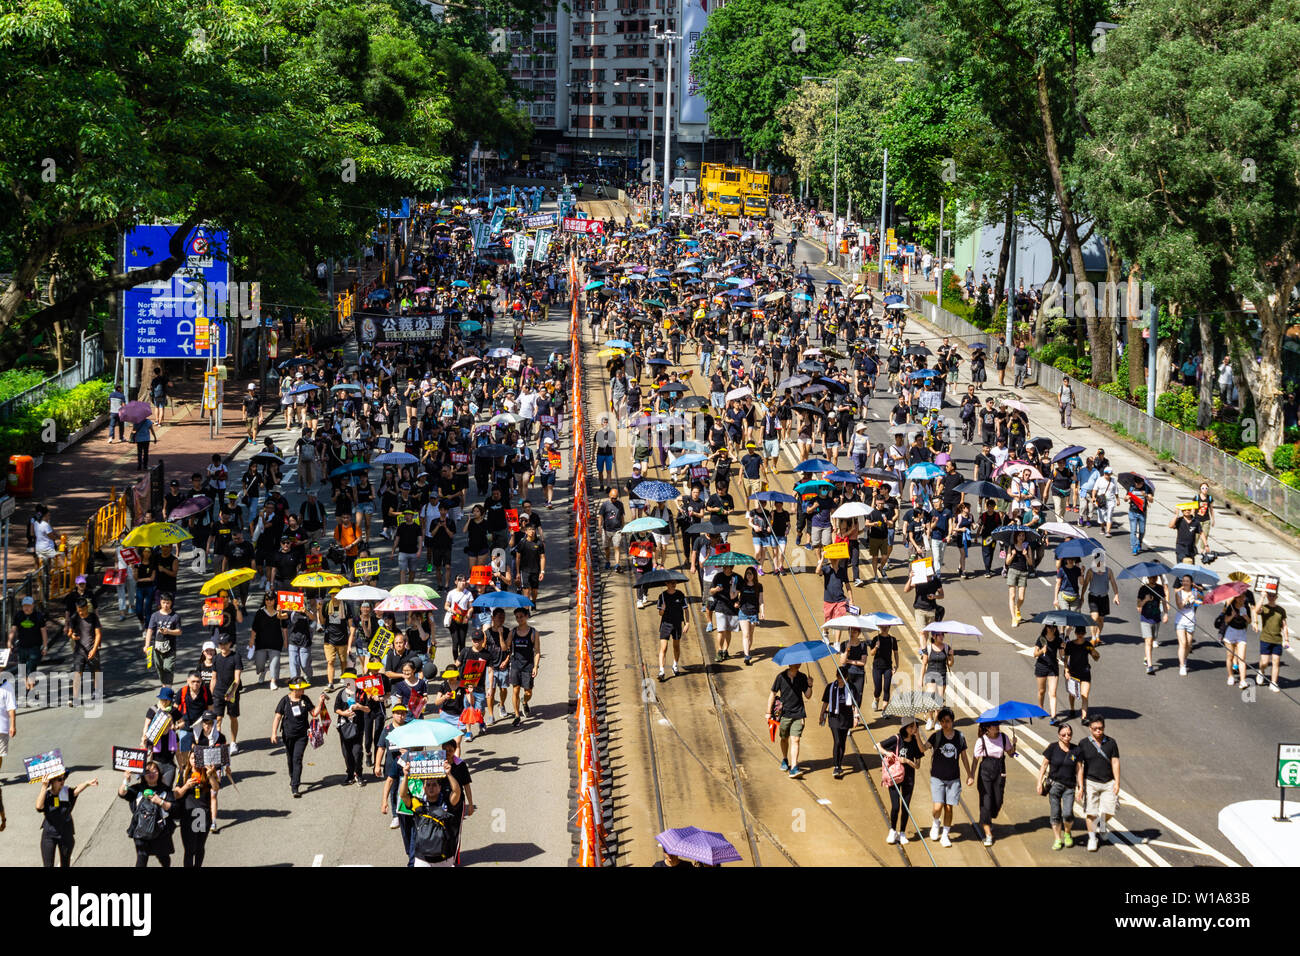 Hong Kong 2019 extradition law protest march on July 1, protesters carry umbrellas to protect themselves against the scorching sun Stock Photo